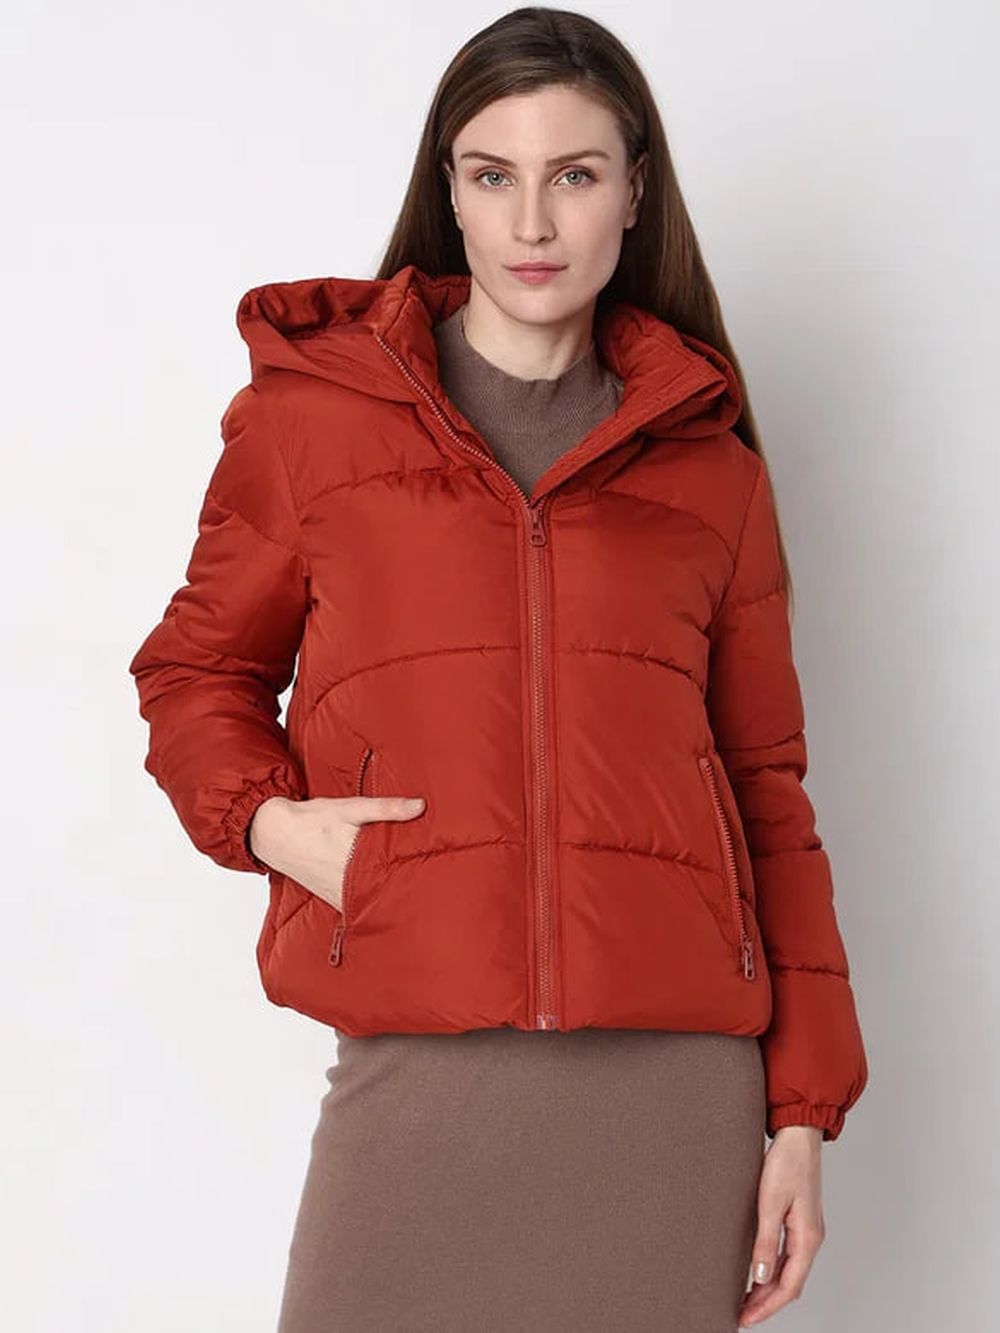 Buy Leather Puffer Jacket, Leather Coat, Puffer Coat, Coat Online in India  - Etsy